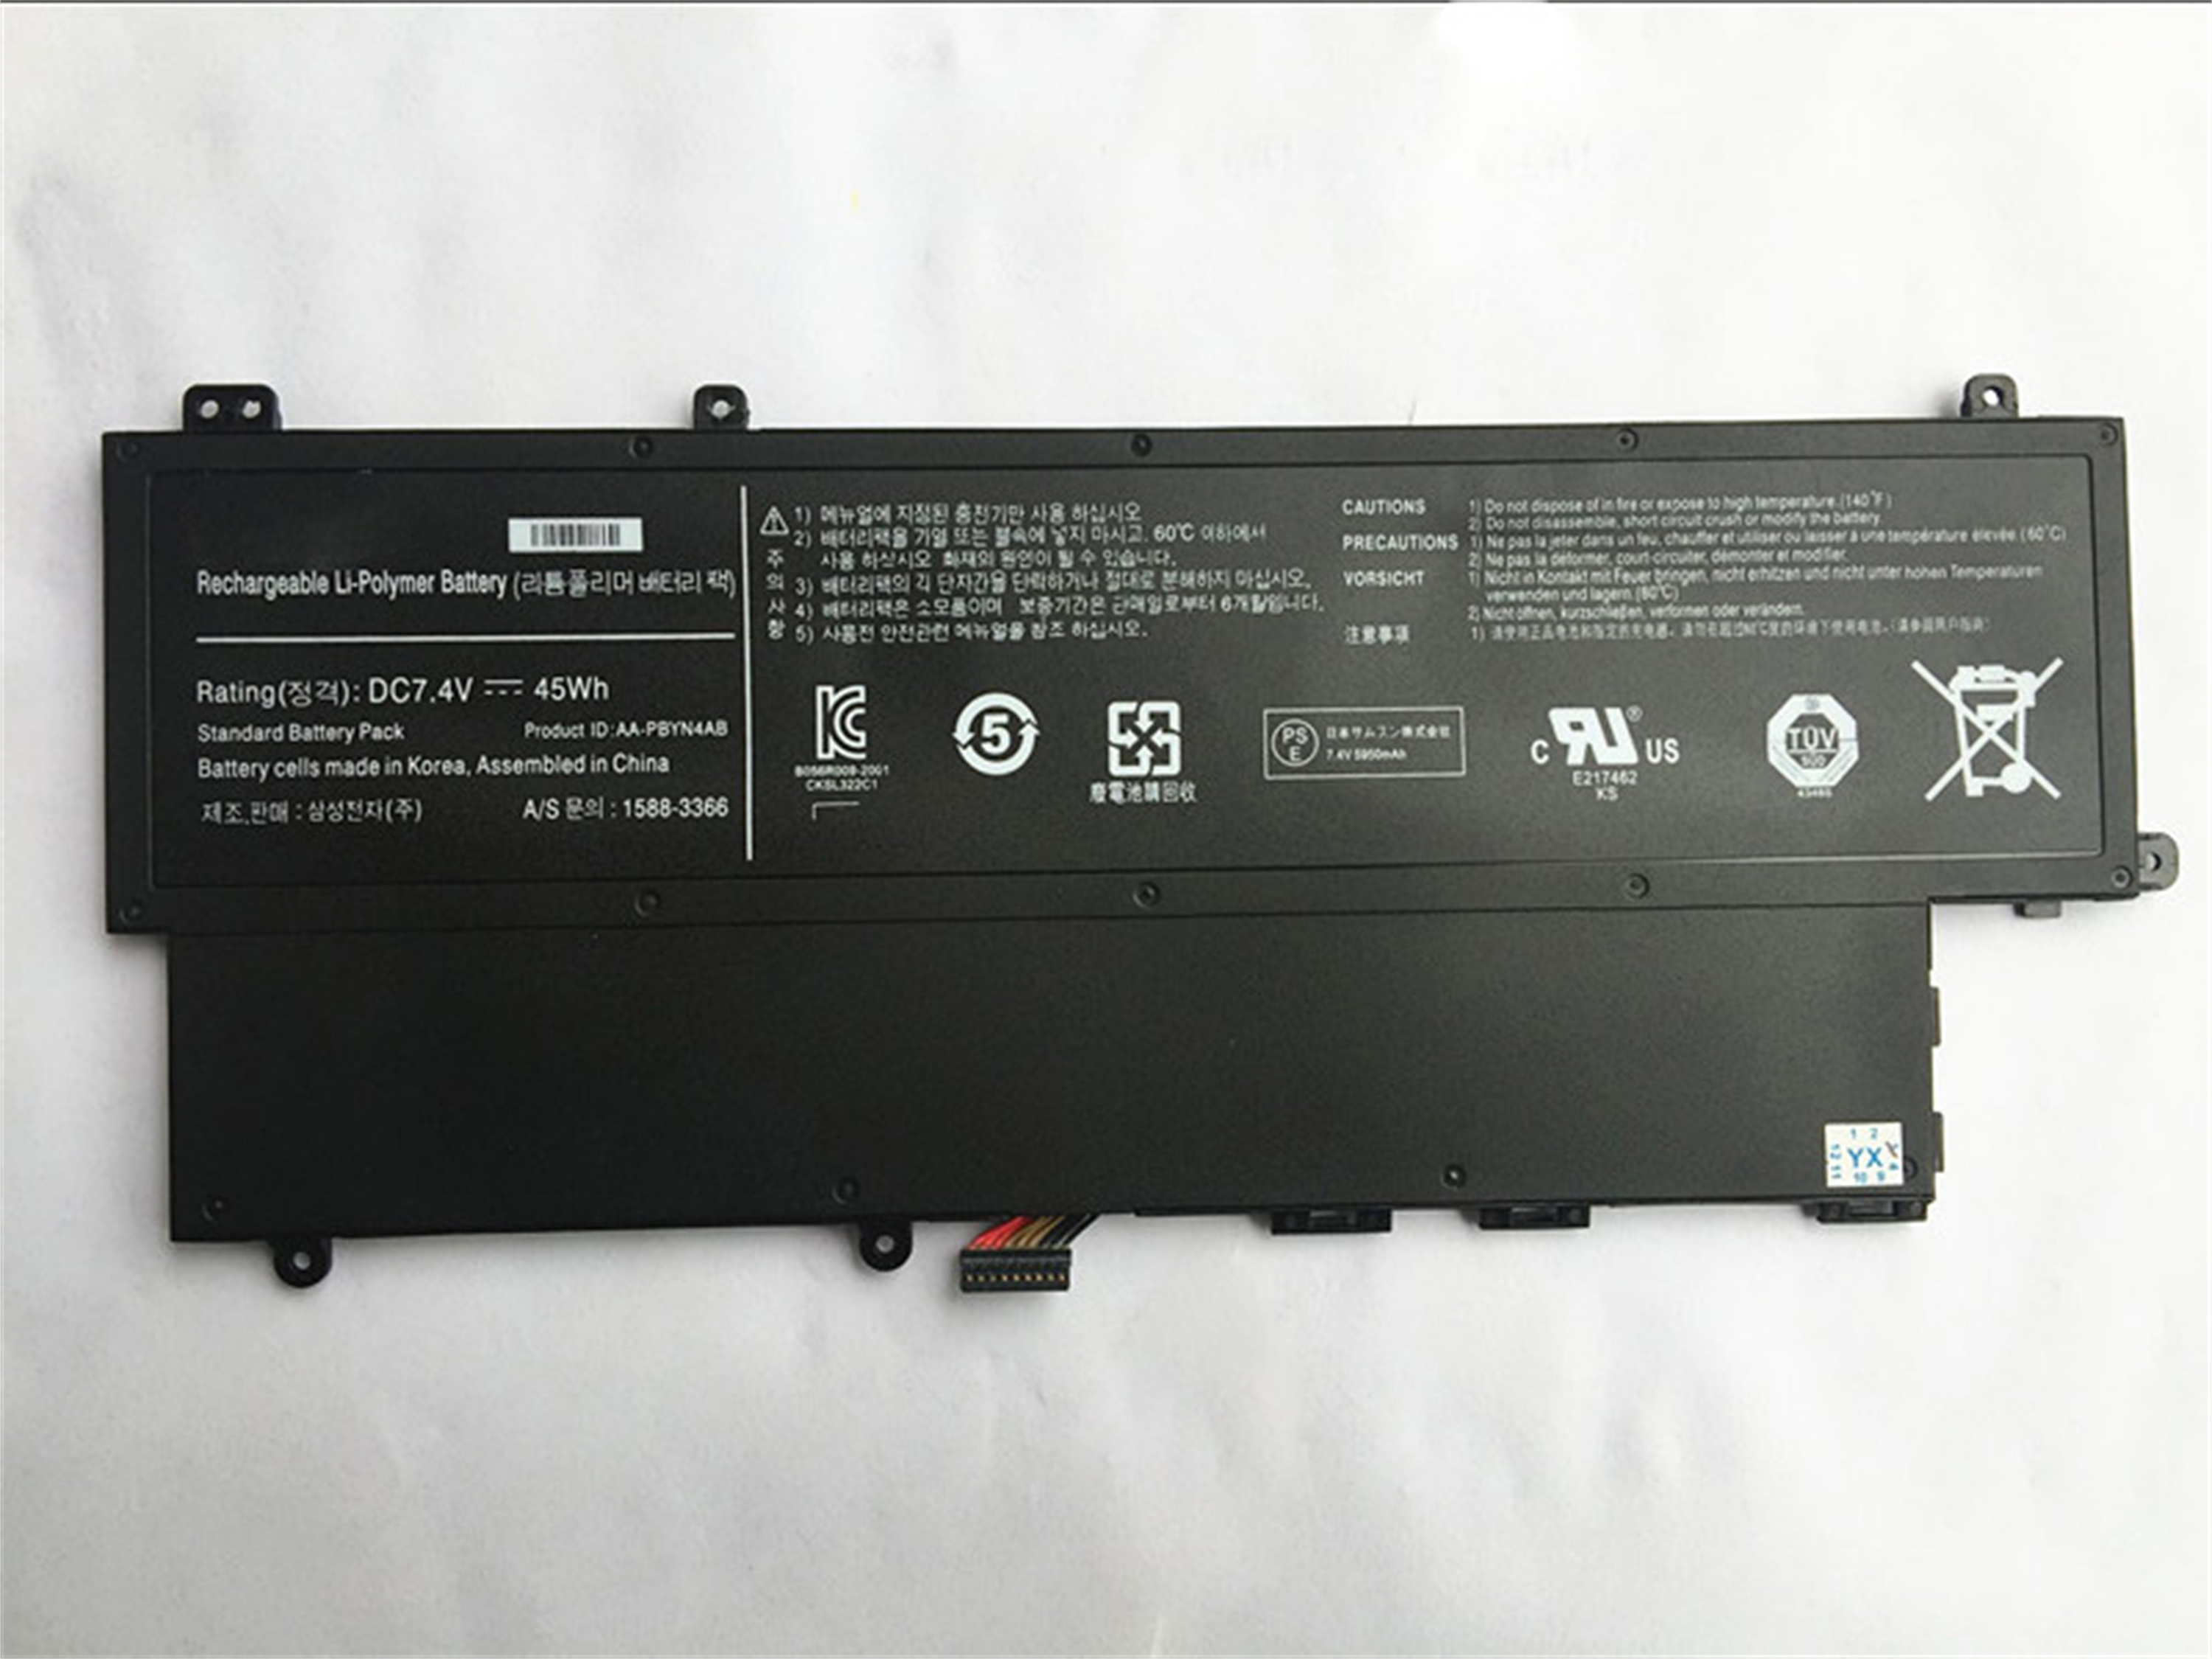 AA-PBYN4AB rechargeable lithium ion Notebook battery Laptop batteryNP530U3B NP530U3C 530U3B 530U3C NP540U3C 540U3C 530U3B-A01 530U3B-A02 530U3B-A04 530U3C-A02 530U3C-A05